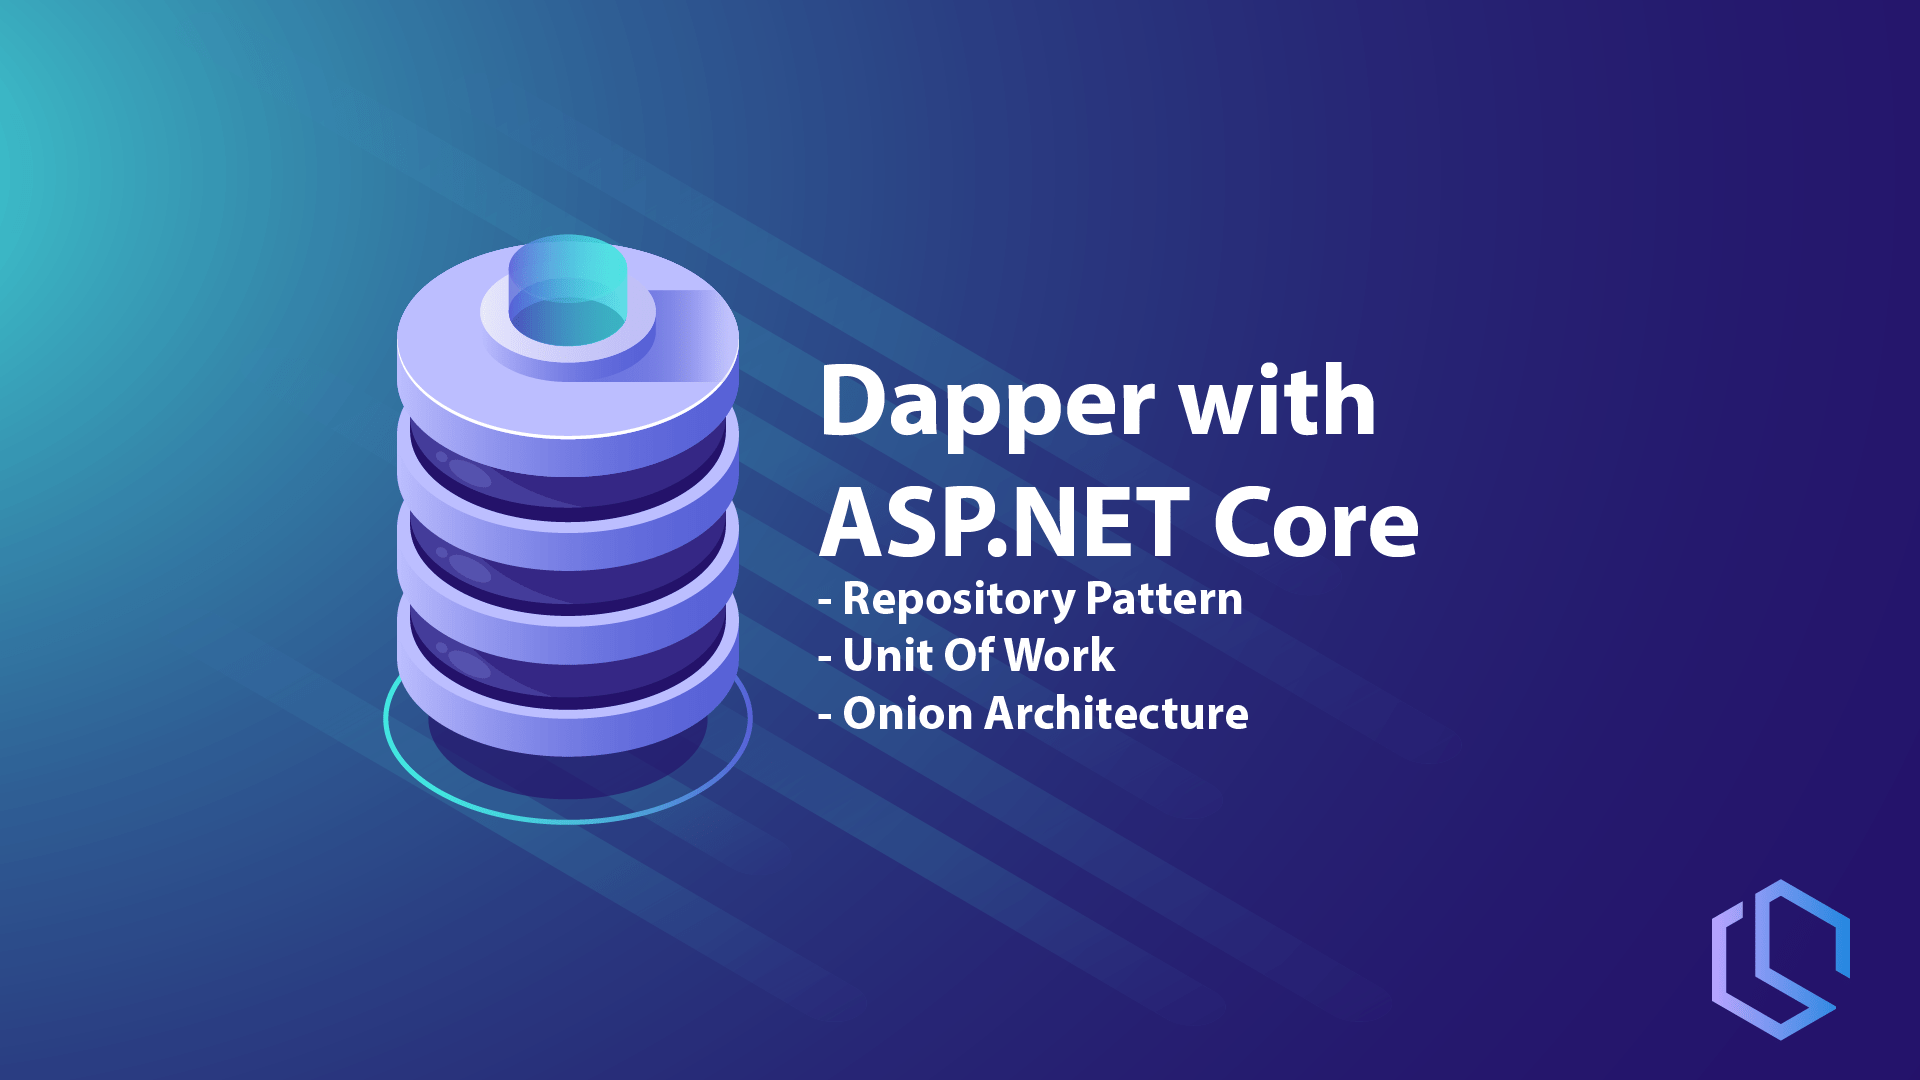 How to use Dapper with ASP.NET Core and Repository Pattern